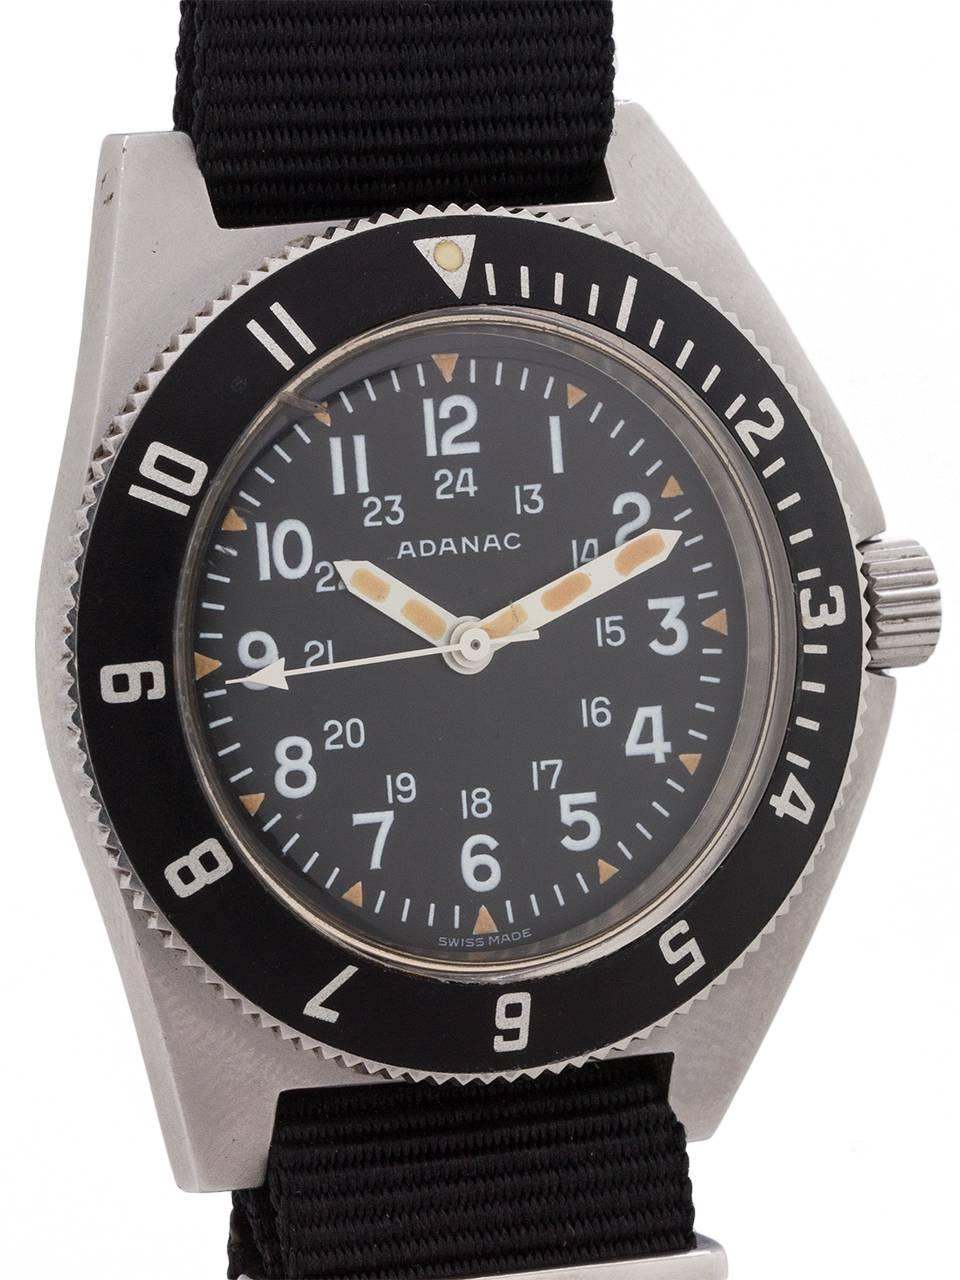 
Adanac (Canada spelled backward) military issued model to the USAF and Canadian armed forces circa 1986. Featuring large 43.8 X 47.8 rugged brushed finish stainless steel case with sloped and integrated rotating elapsed time bezel, and asymmetrical